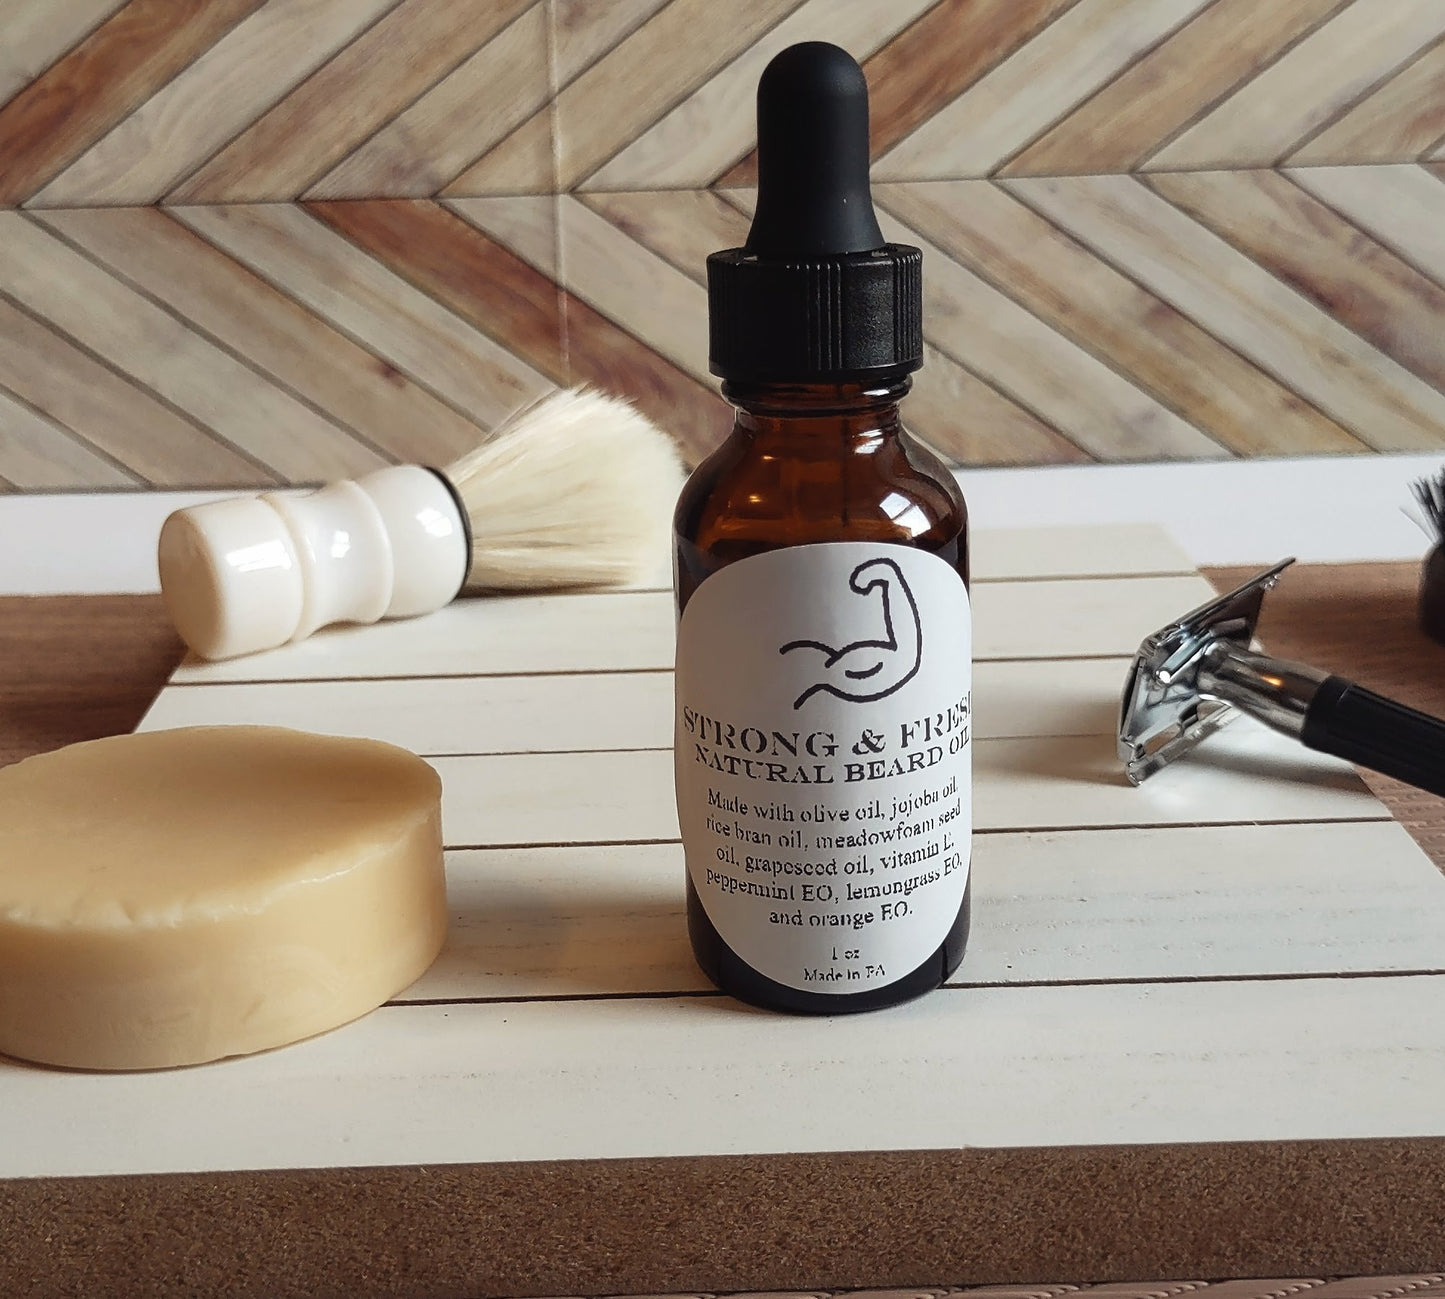 Strong and Fresh Beard Oil